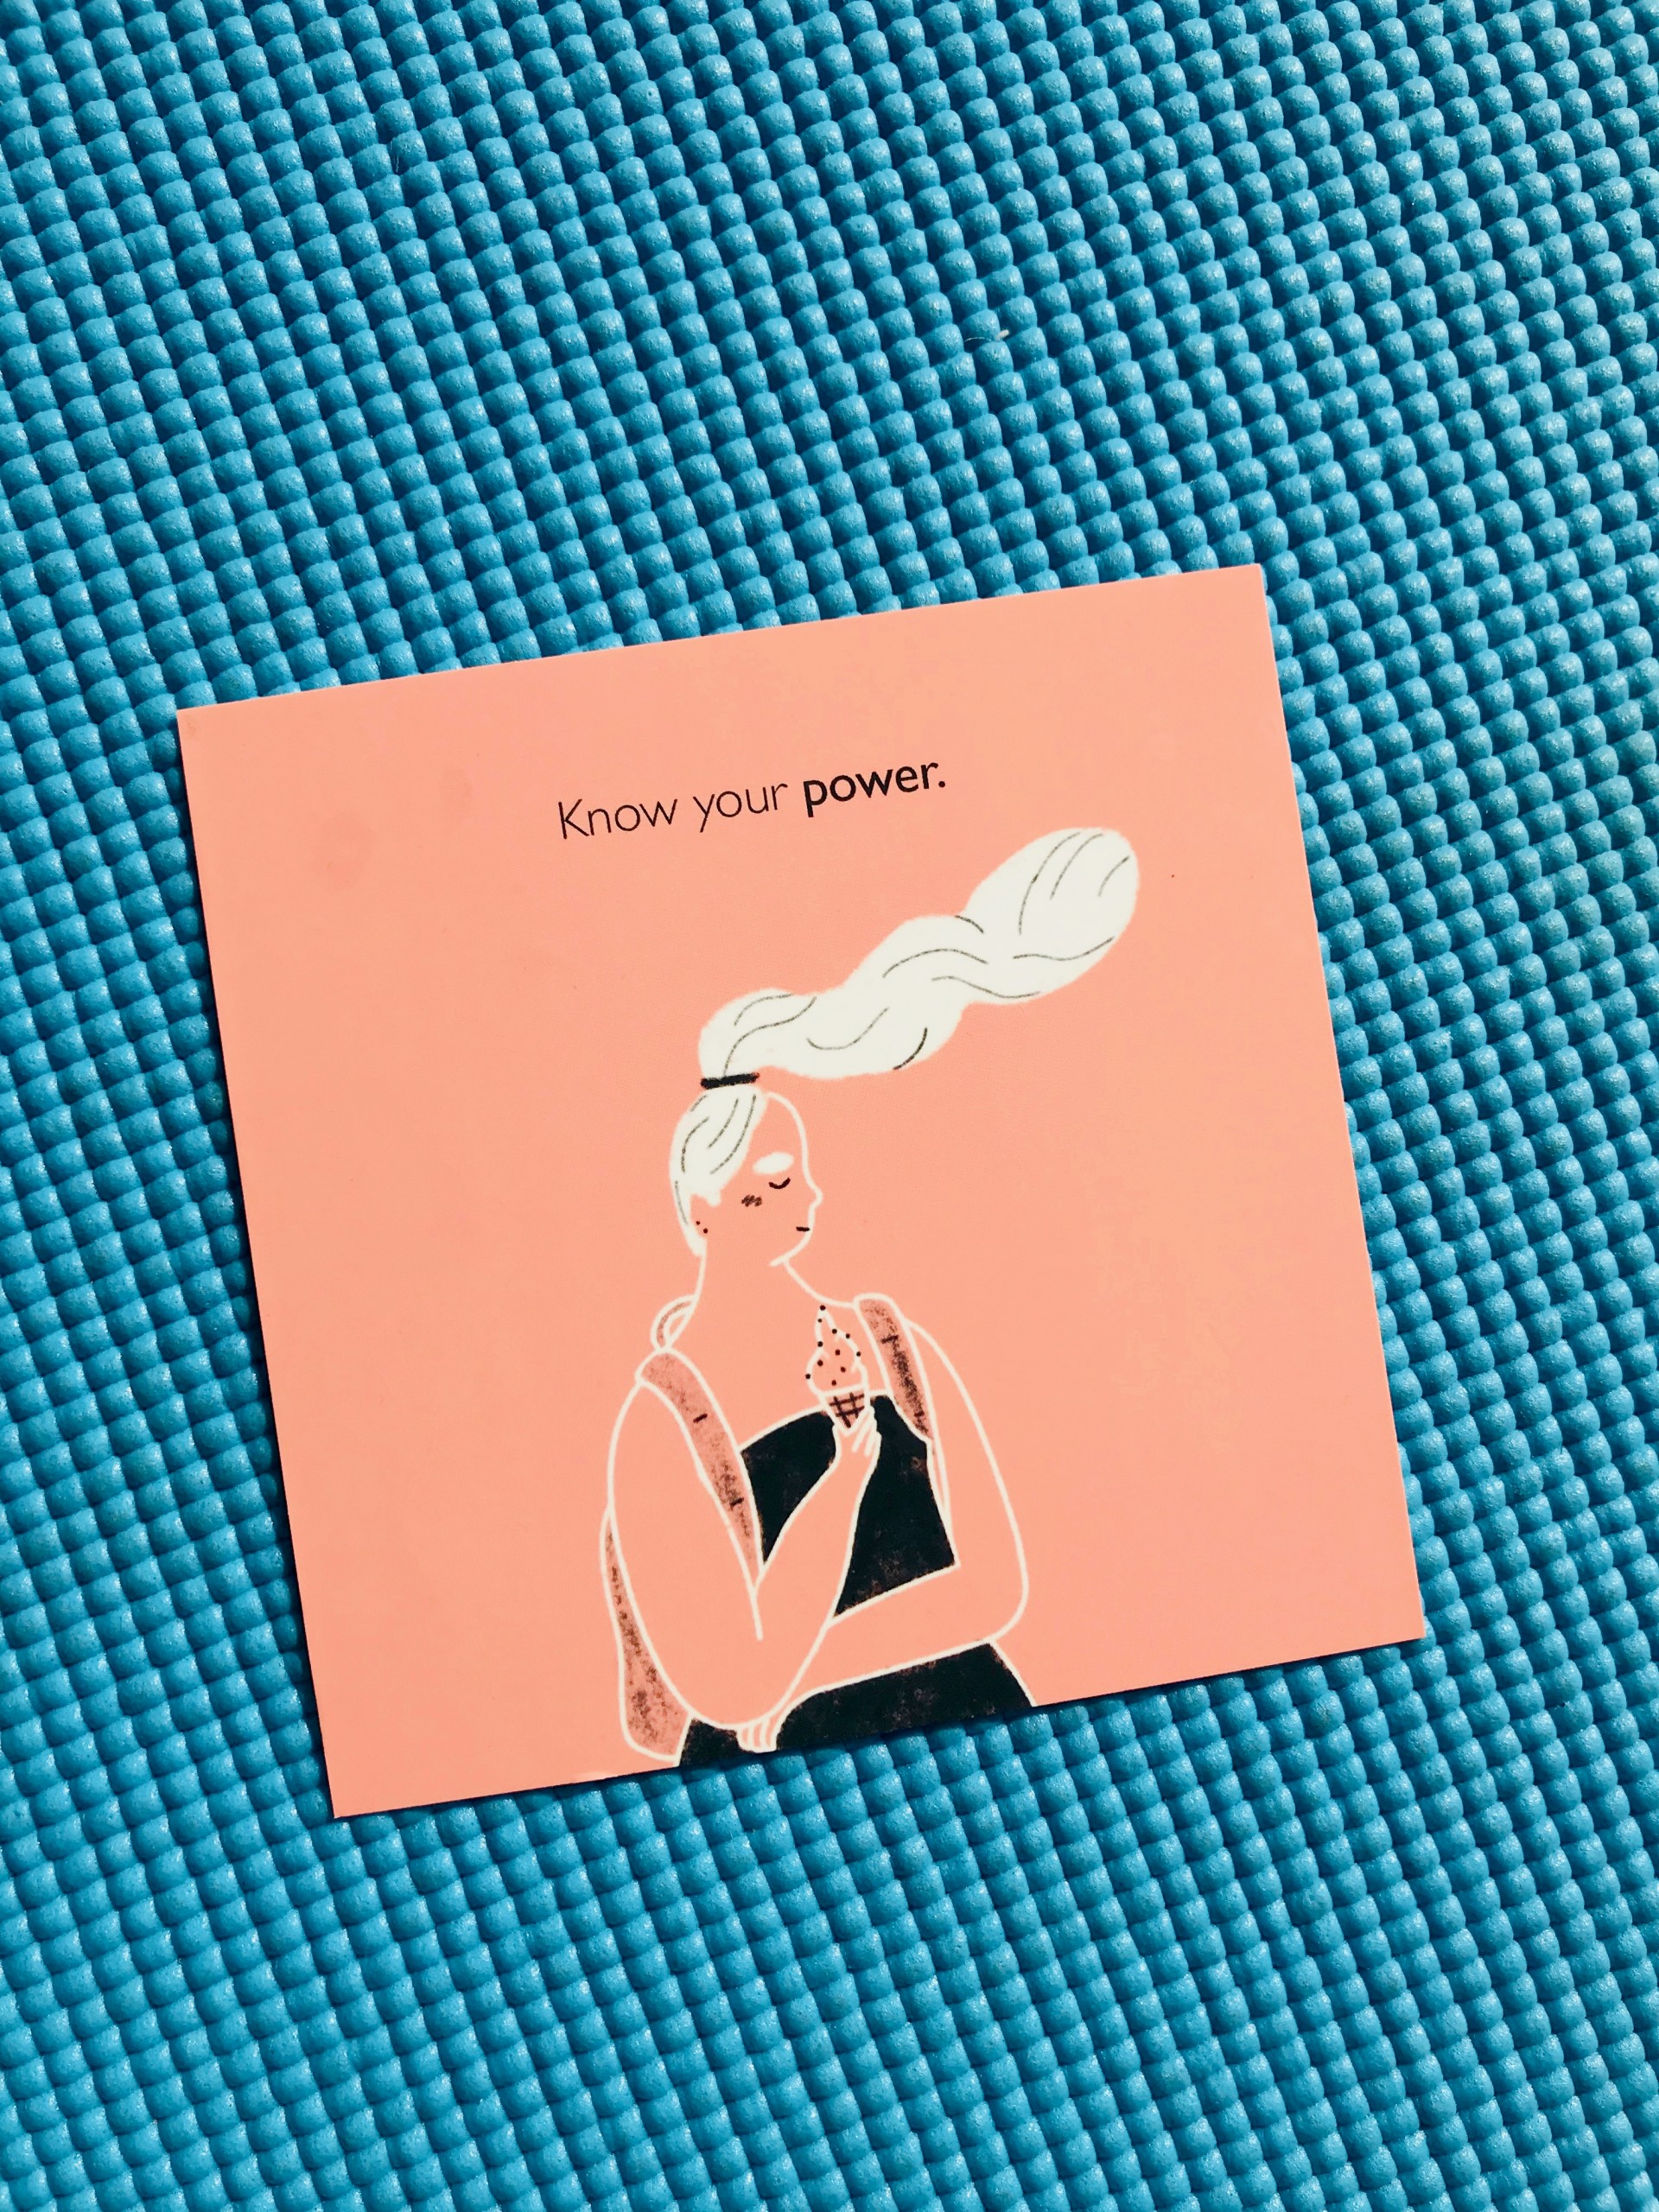 Pink square postcard against blue yoga mat. Figure on postcard is of girl with hair blowing in wind eating ice cream. Text reads, "Know Your Power"